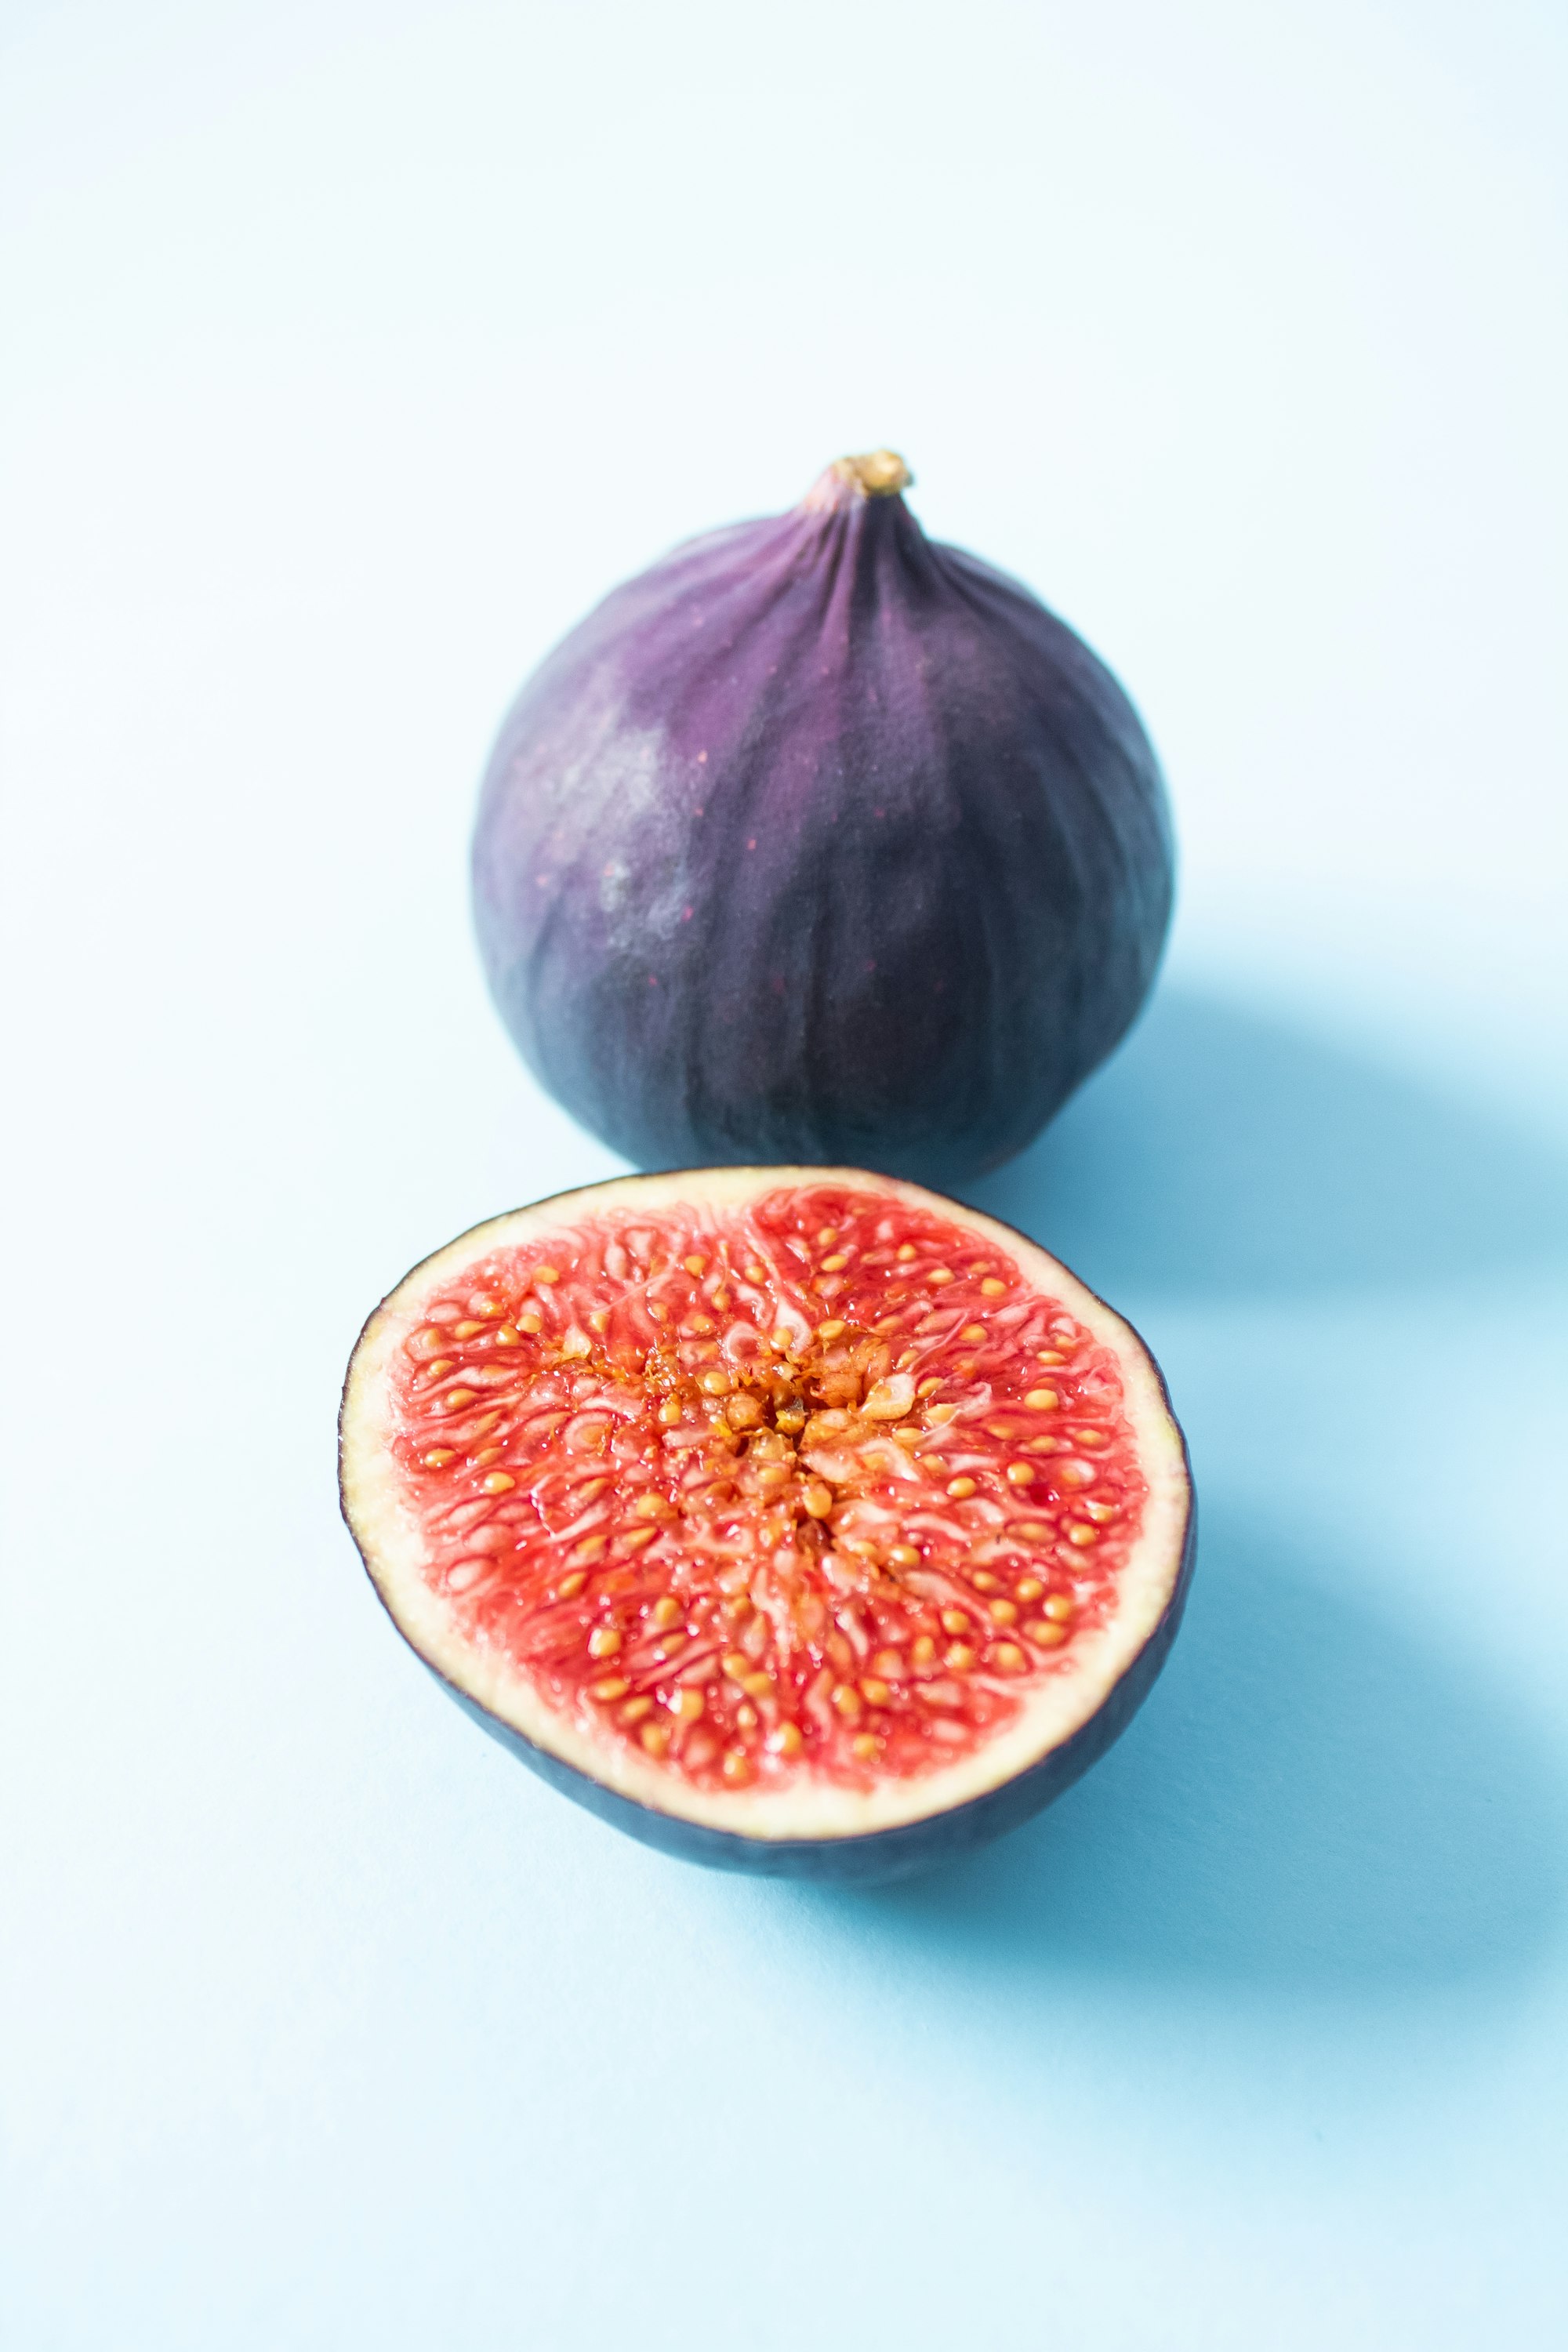 Ripe figs from garden on light blue background